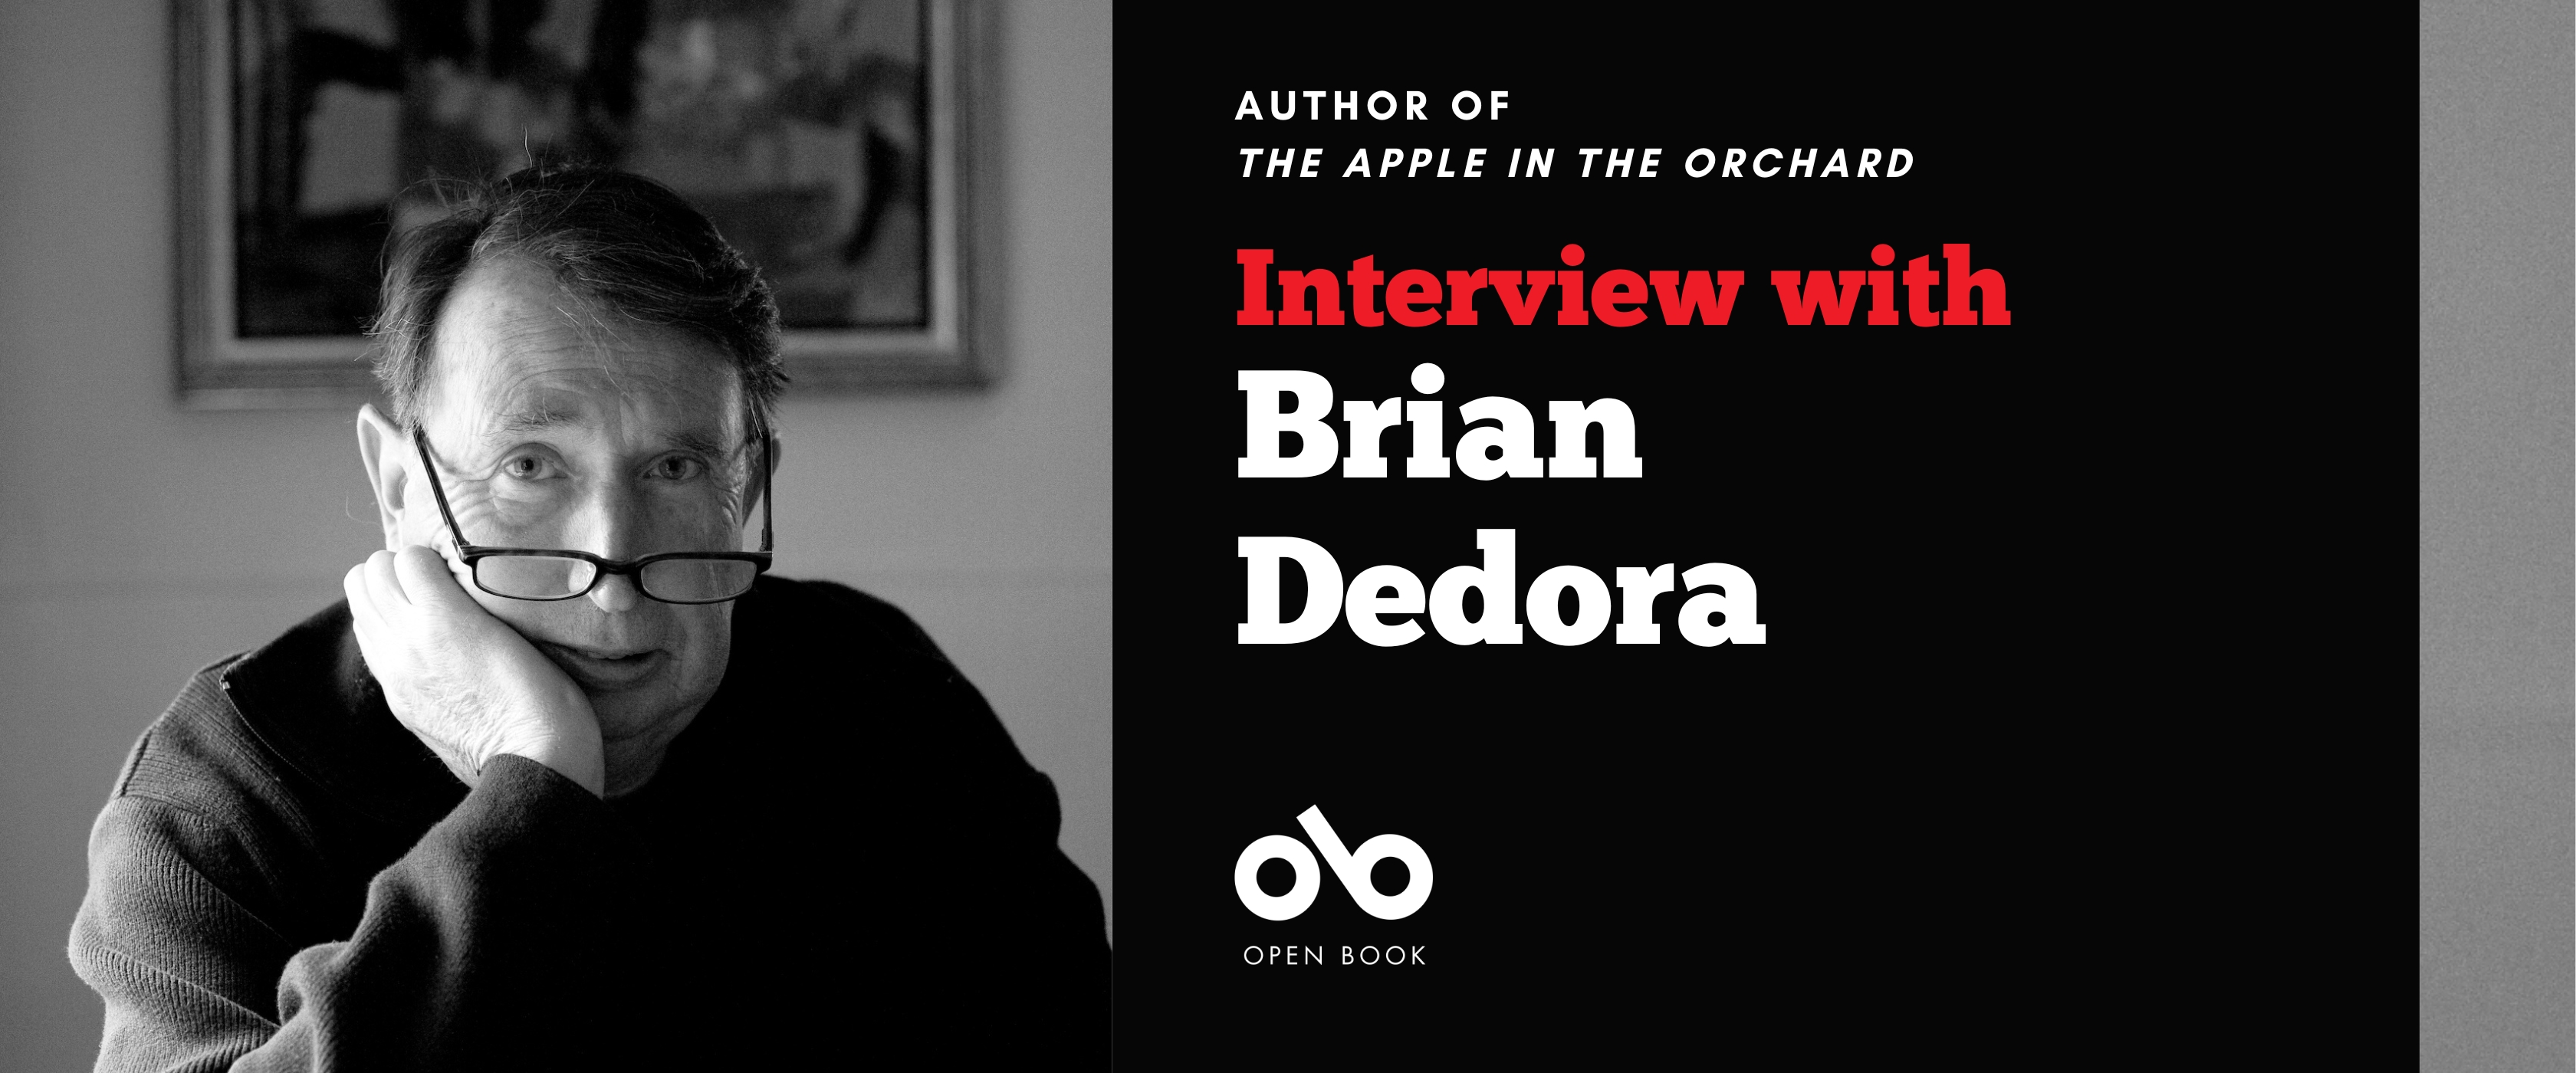 Interview with Brian Dedors. Author sitting at desk with one hand to face and wearing glasses in his study to left of banner, with text and Open Book logo on black background to the right.